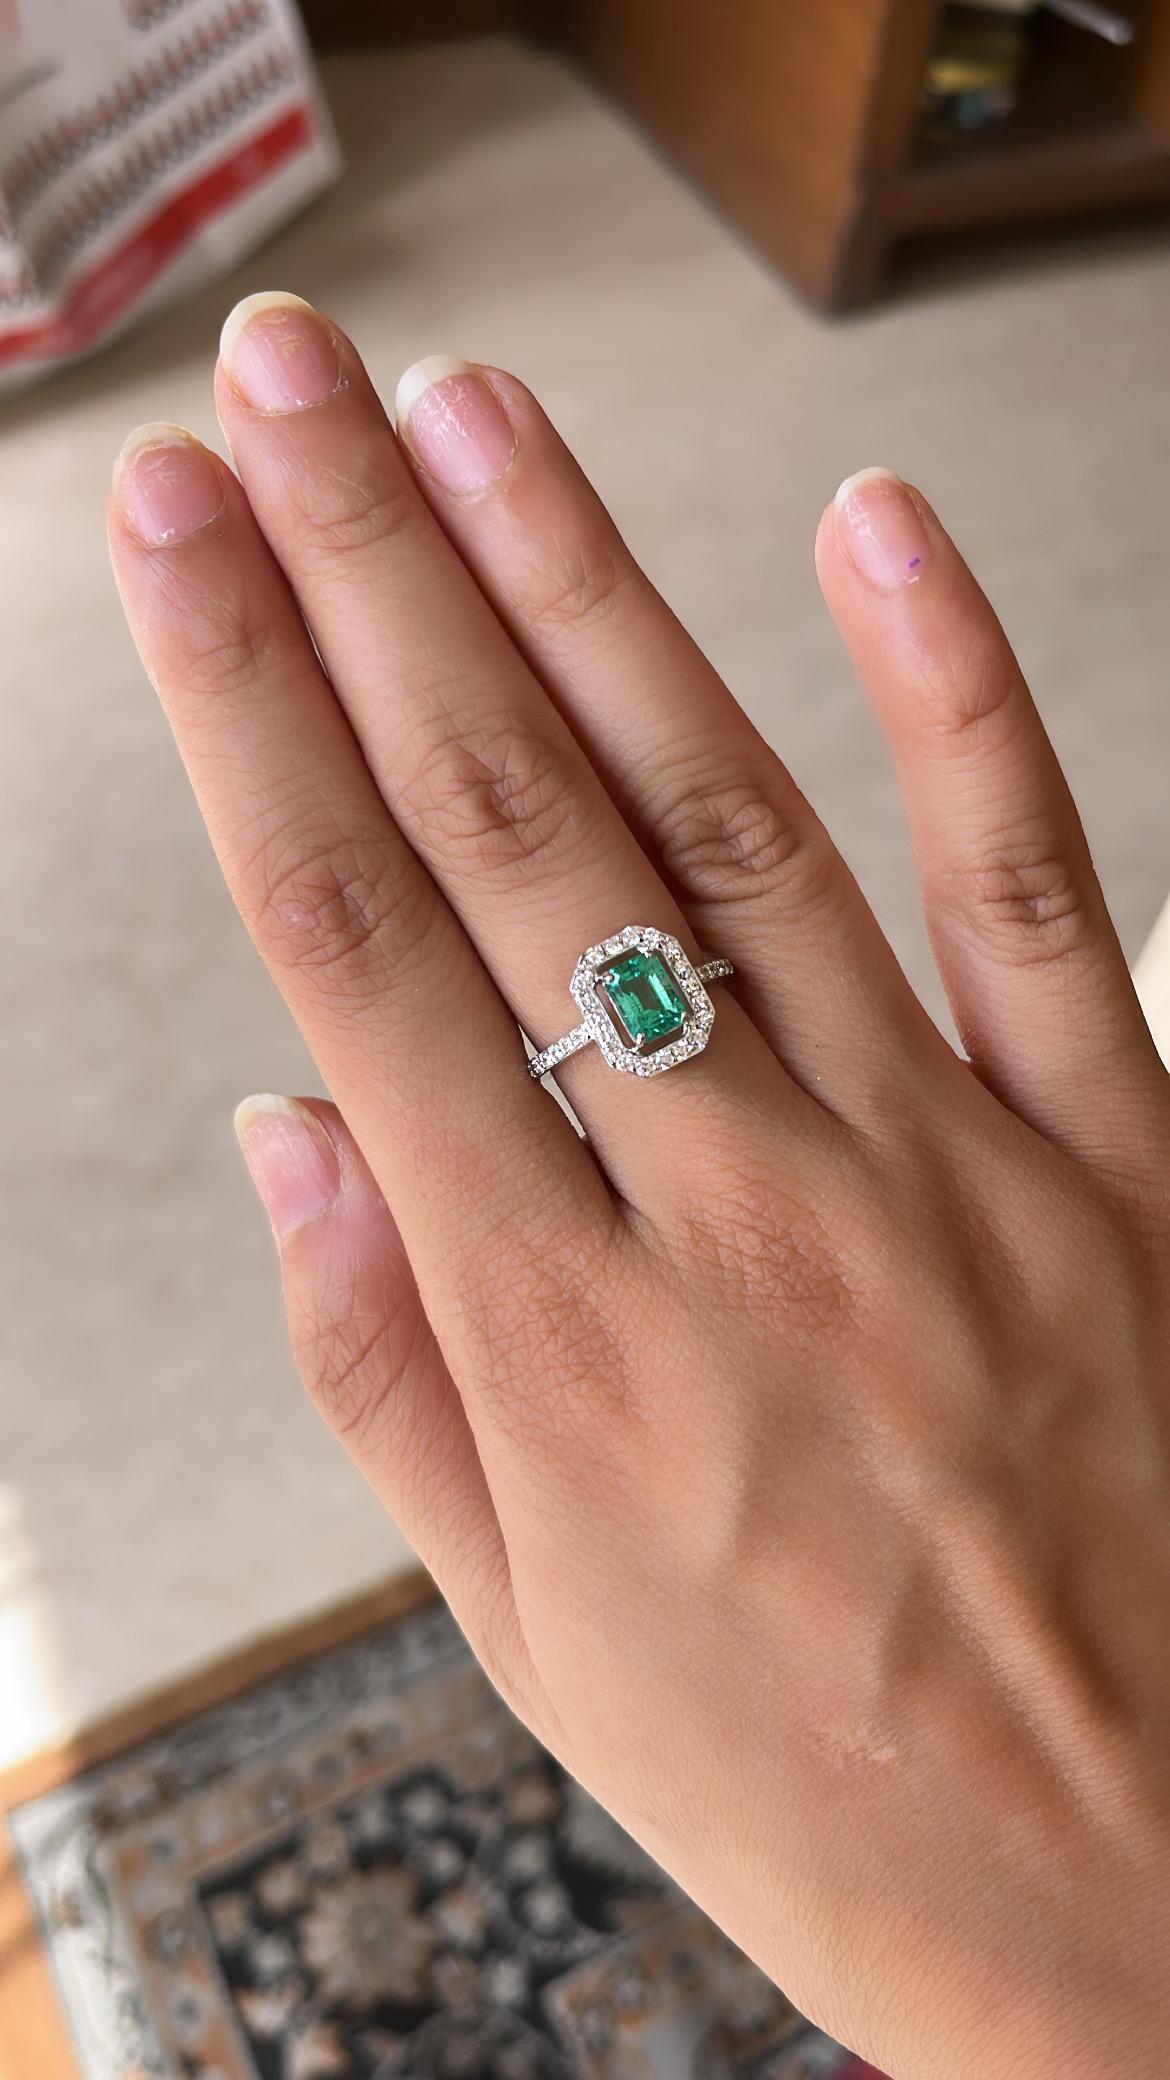 A very simple and beautiful Emerald Engagement Ring set in 18K White Gold & Diamonds. The weight of the Emerald is 1.03 carats. The Emerald is completely natural, without any treatment and is of Zambian origin. The weight of the Diamonds is 0.51